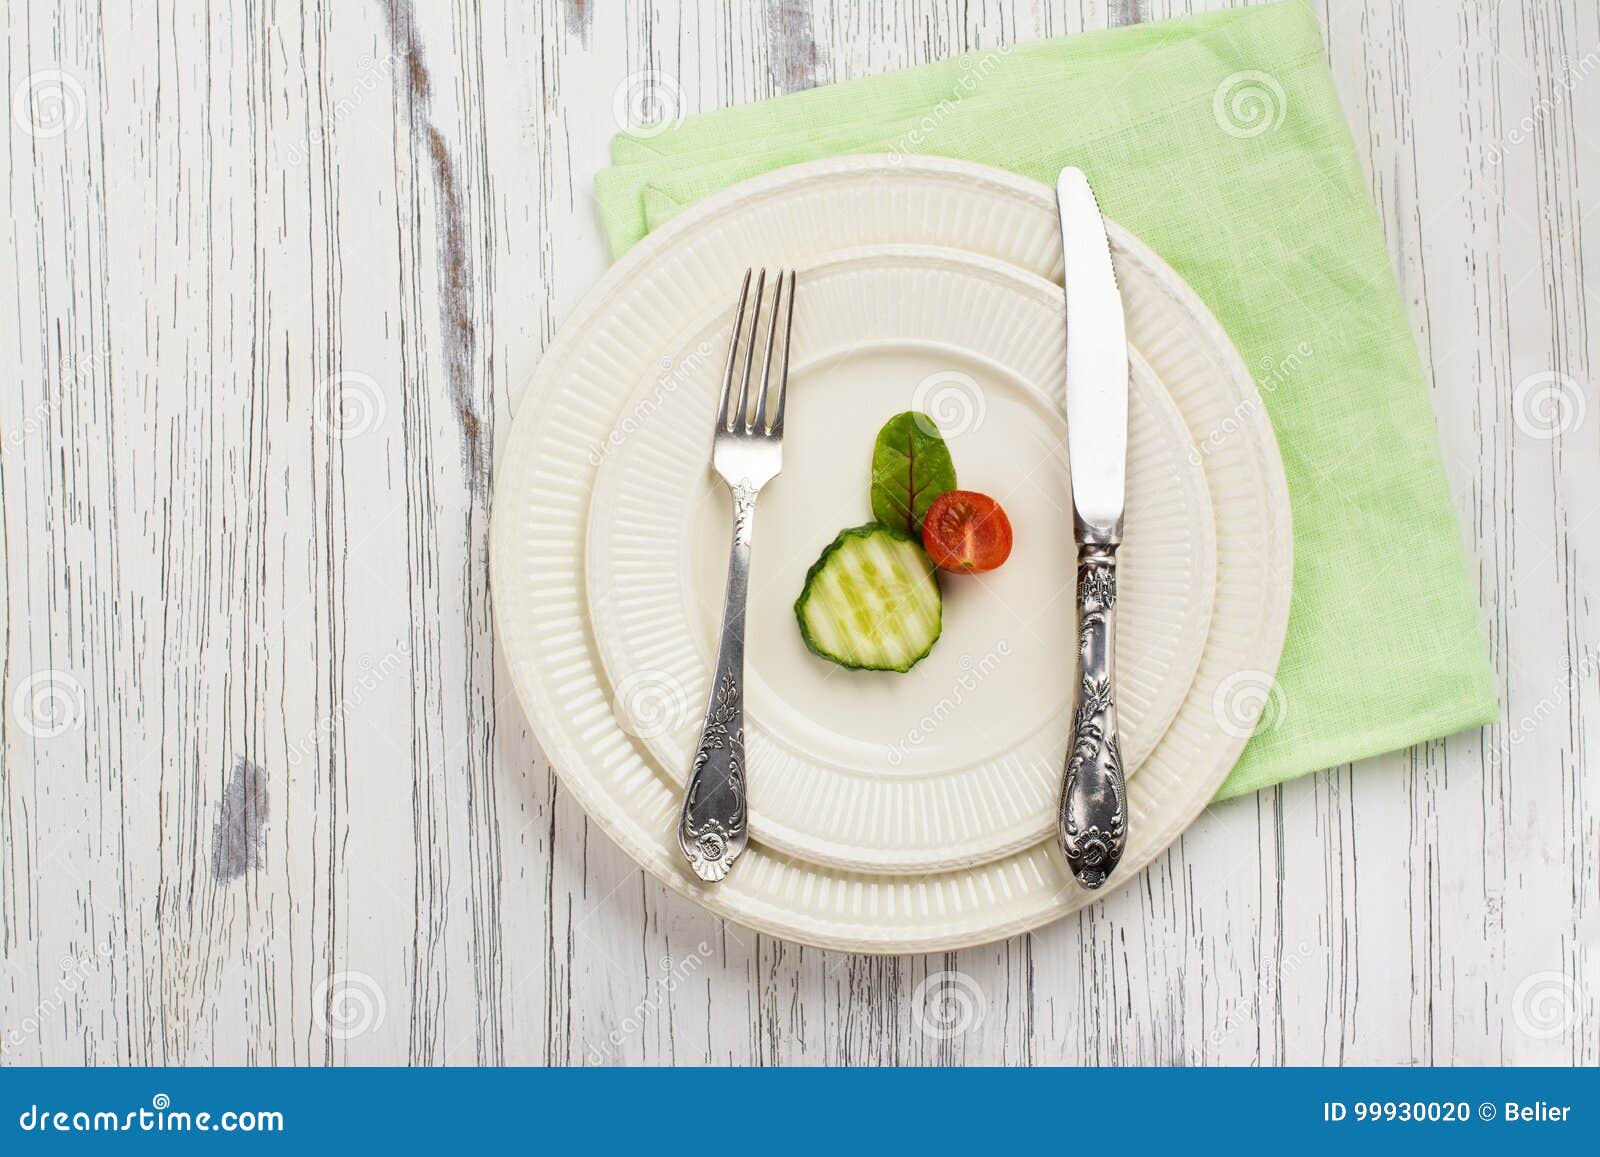 plate with small portion of food